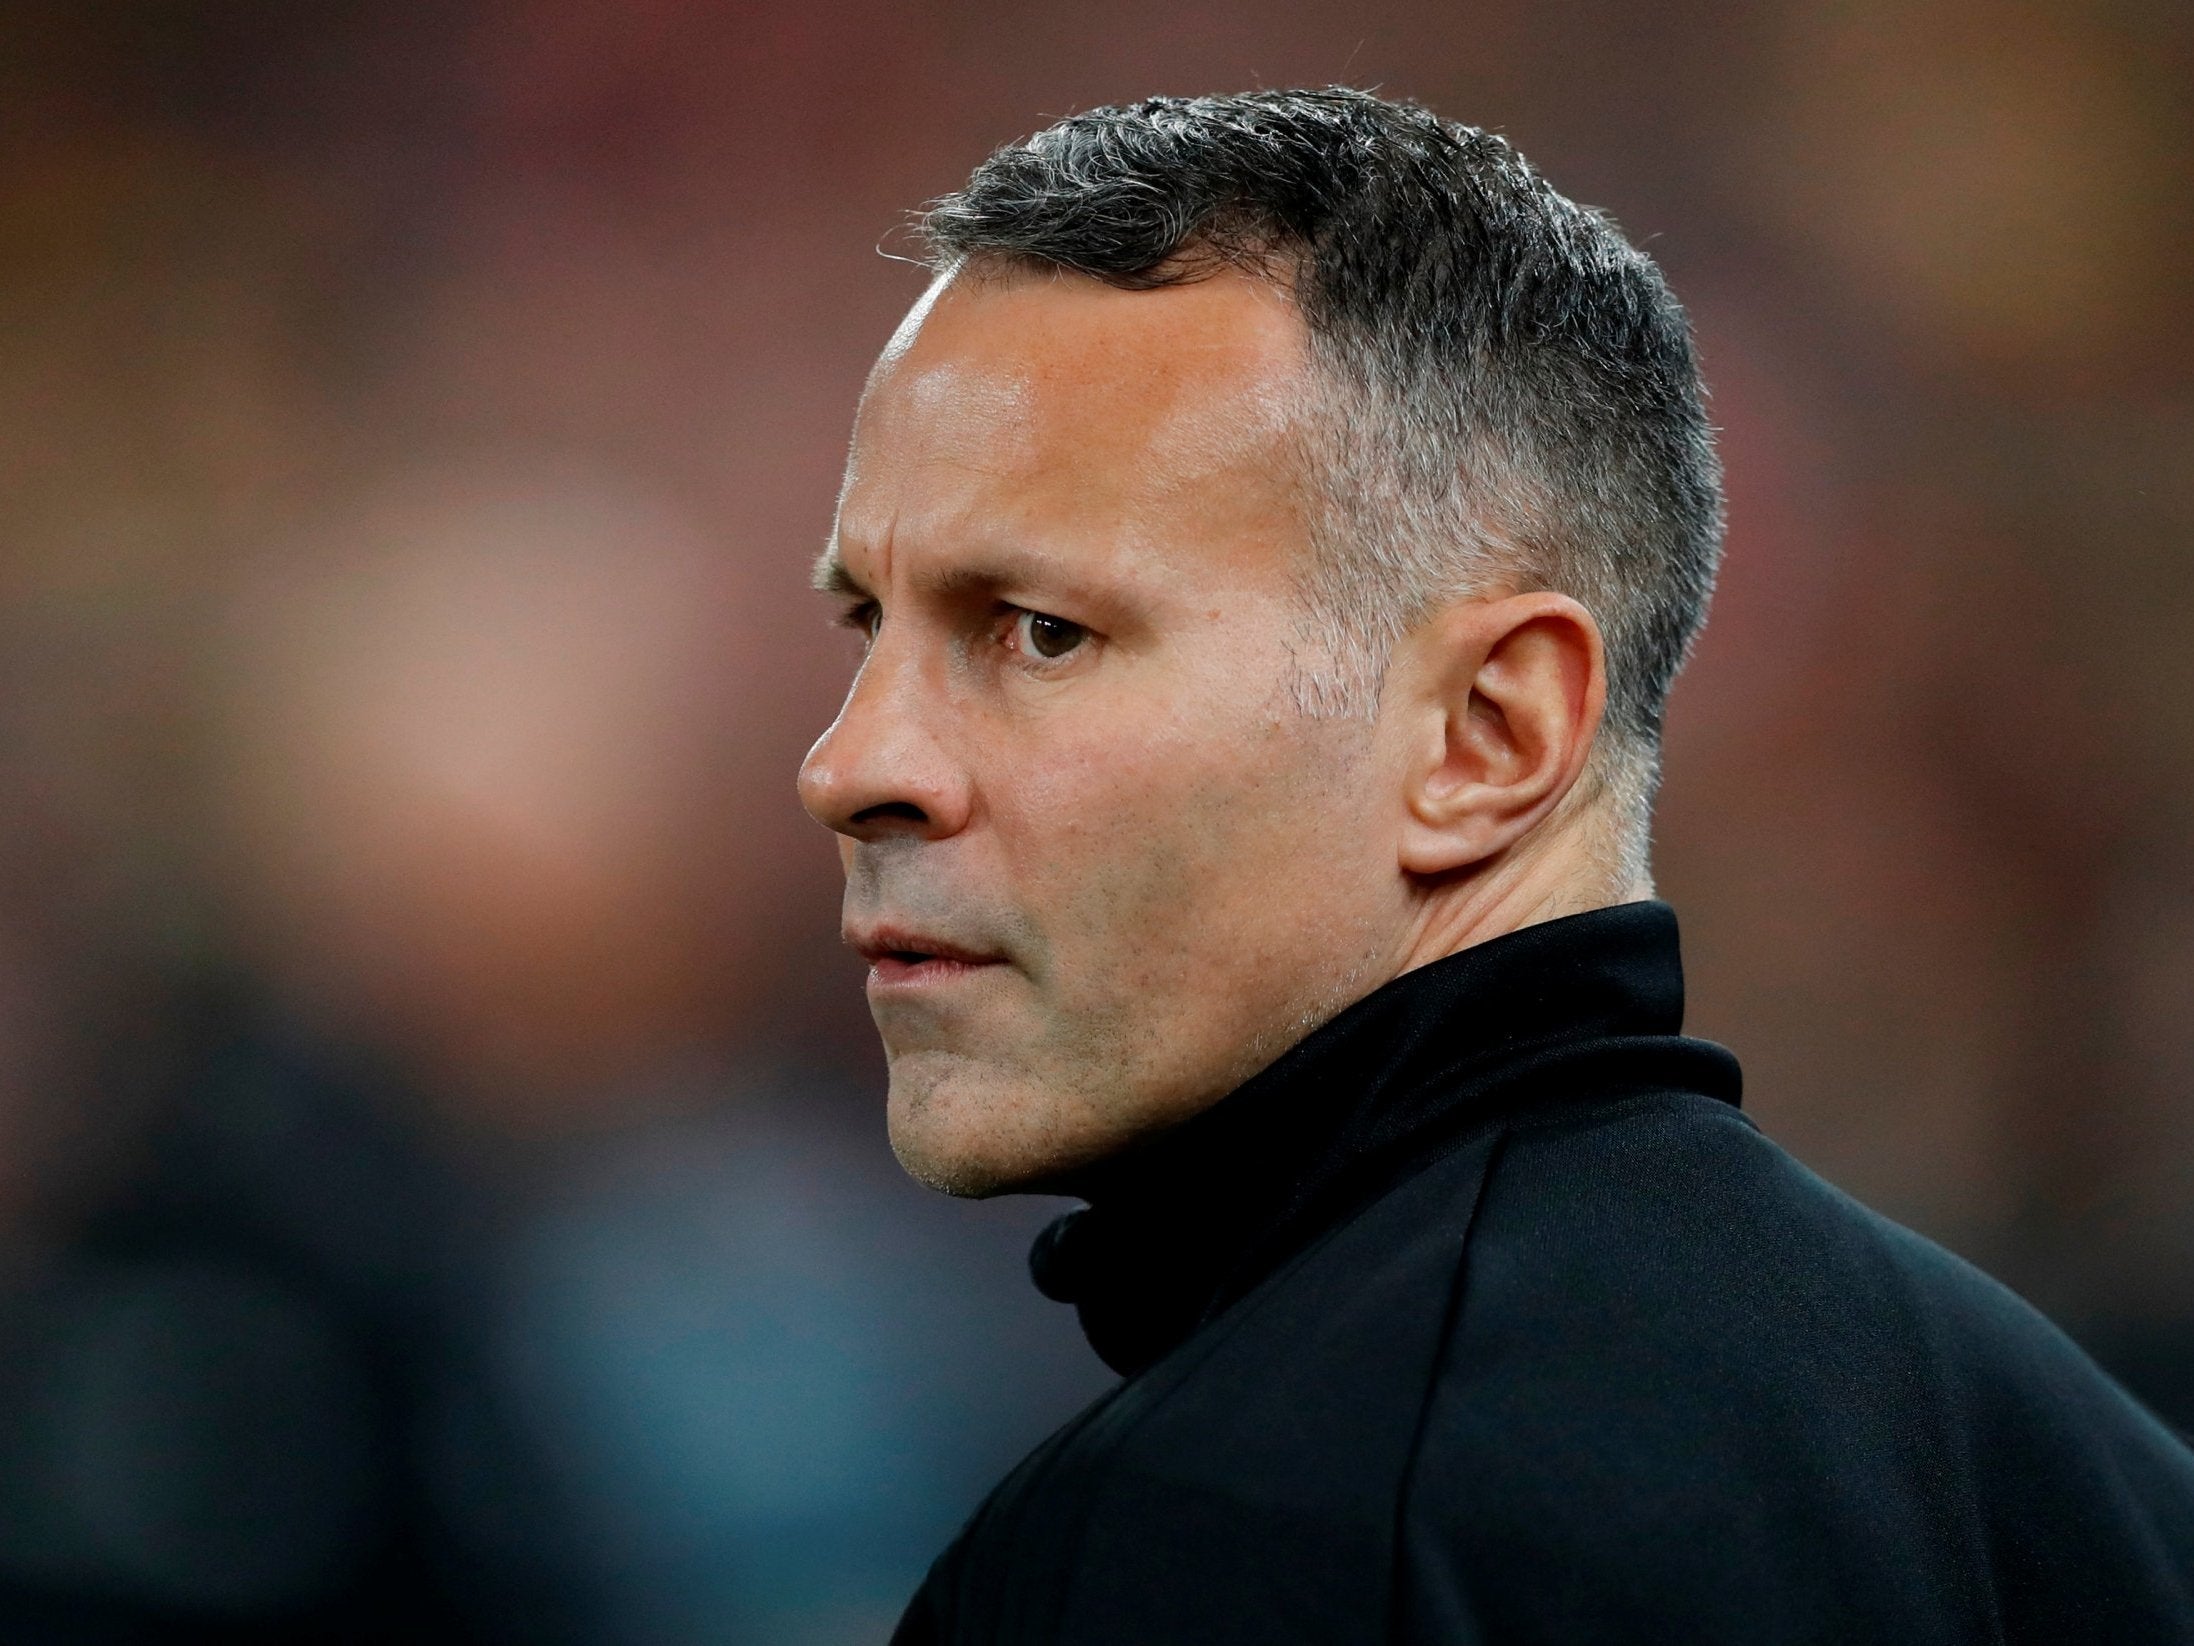 Ryan Giggs is currently Wales manager